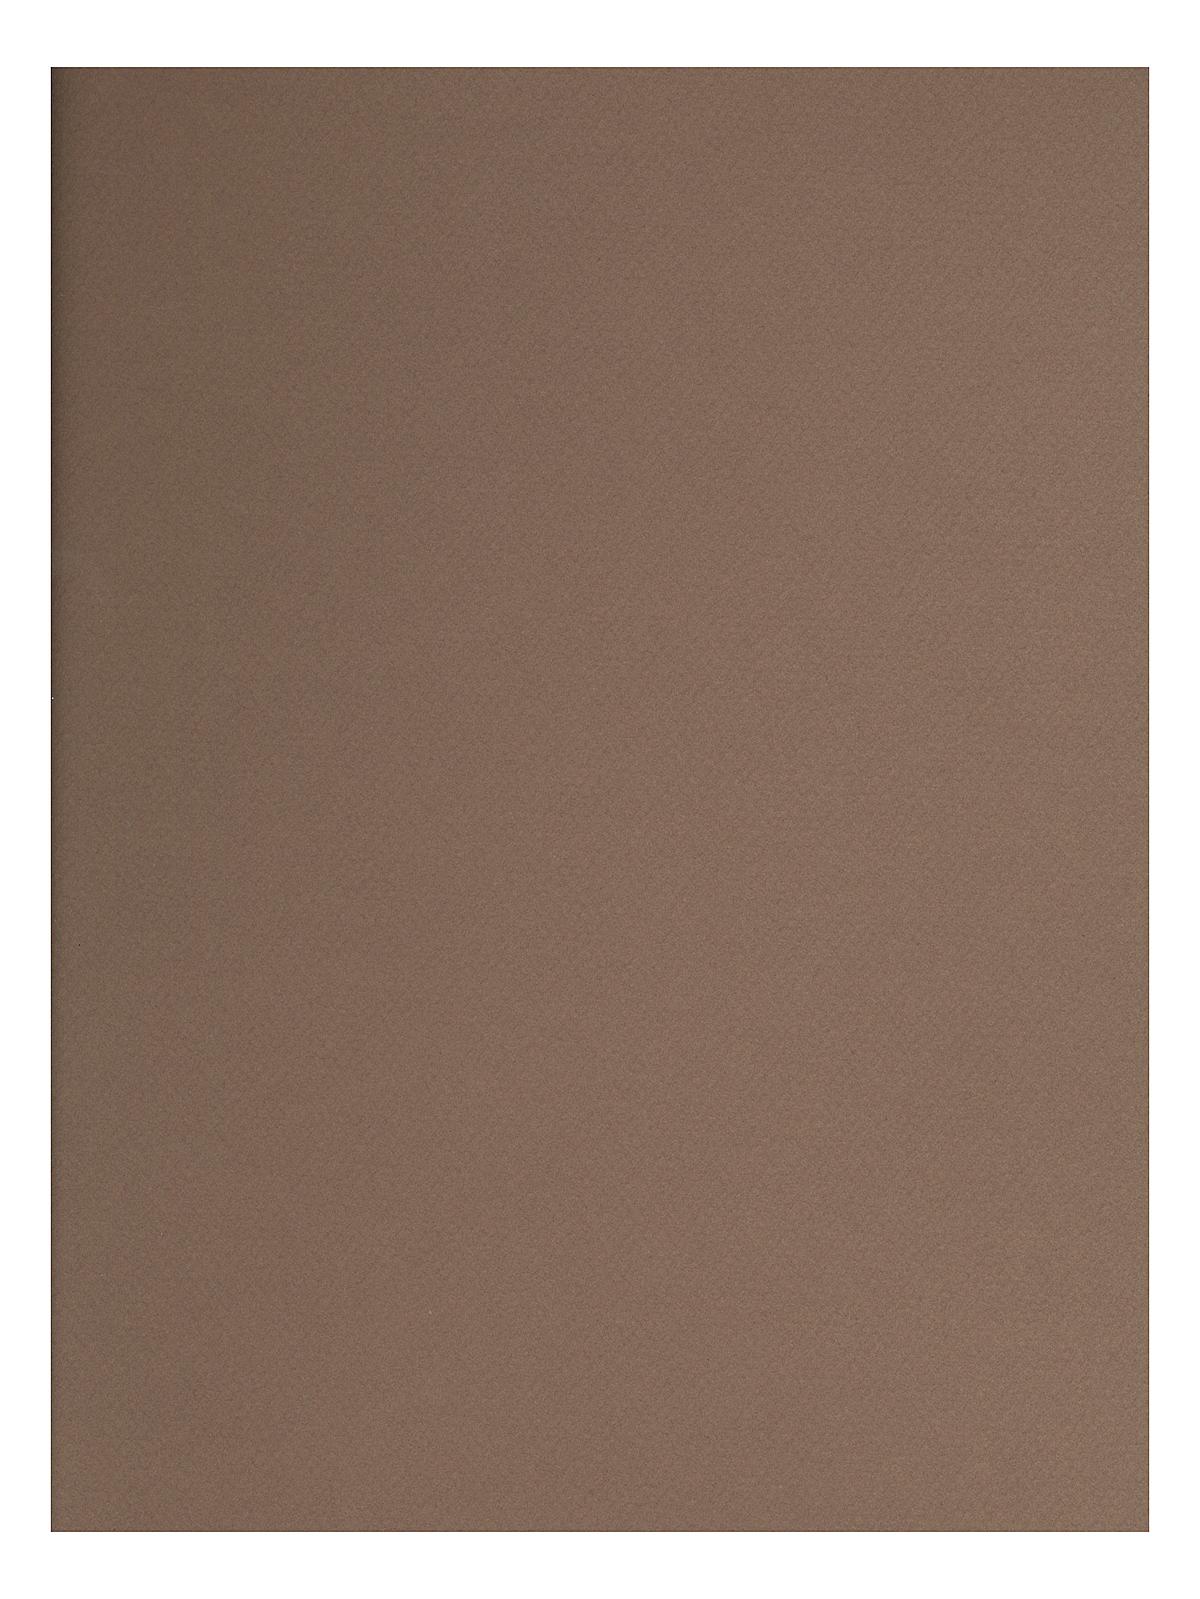 Mi-teintes Tinted Paper Sand 19 In. X 25 In.